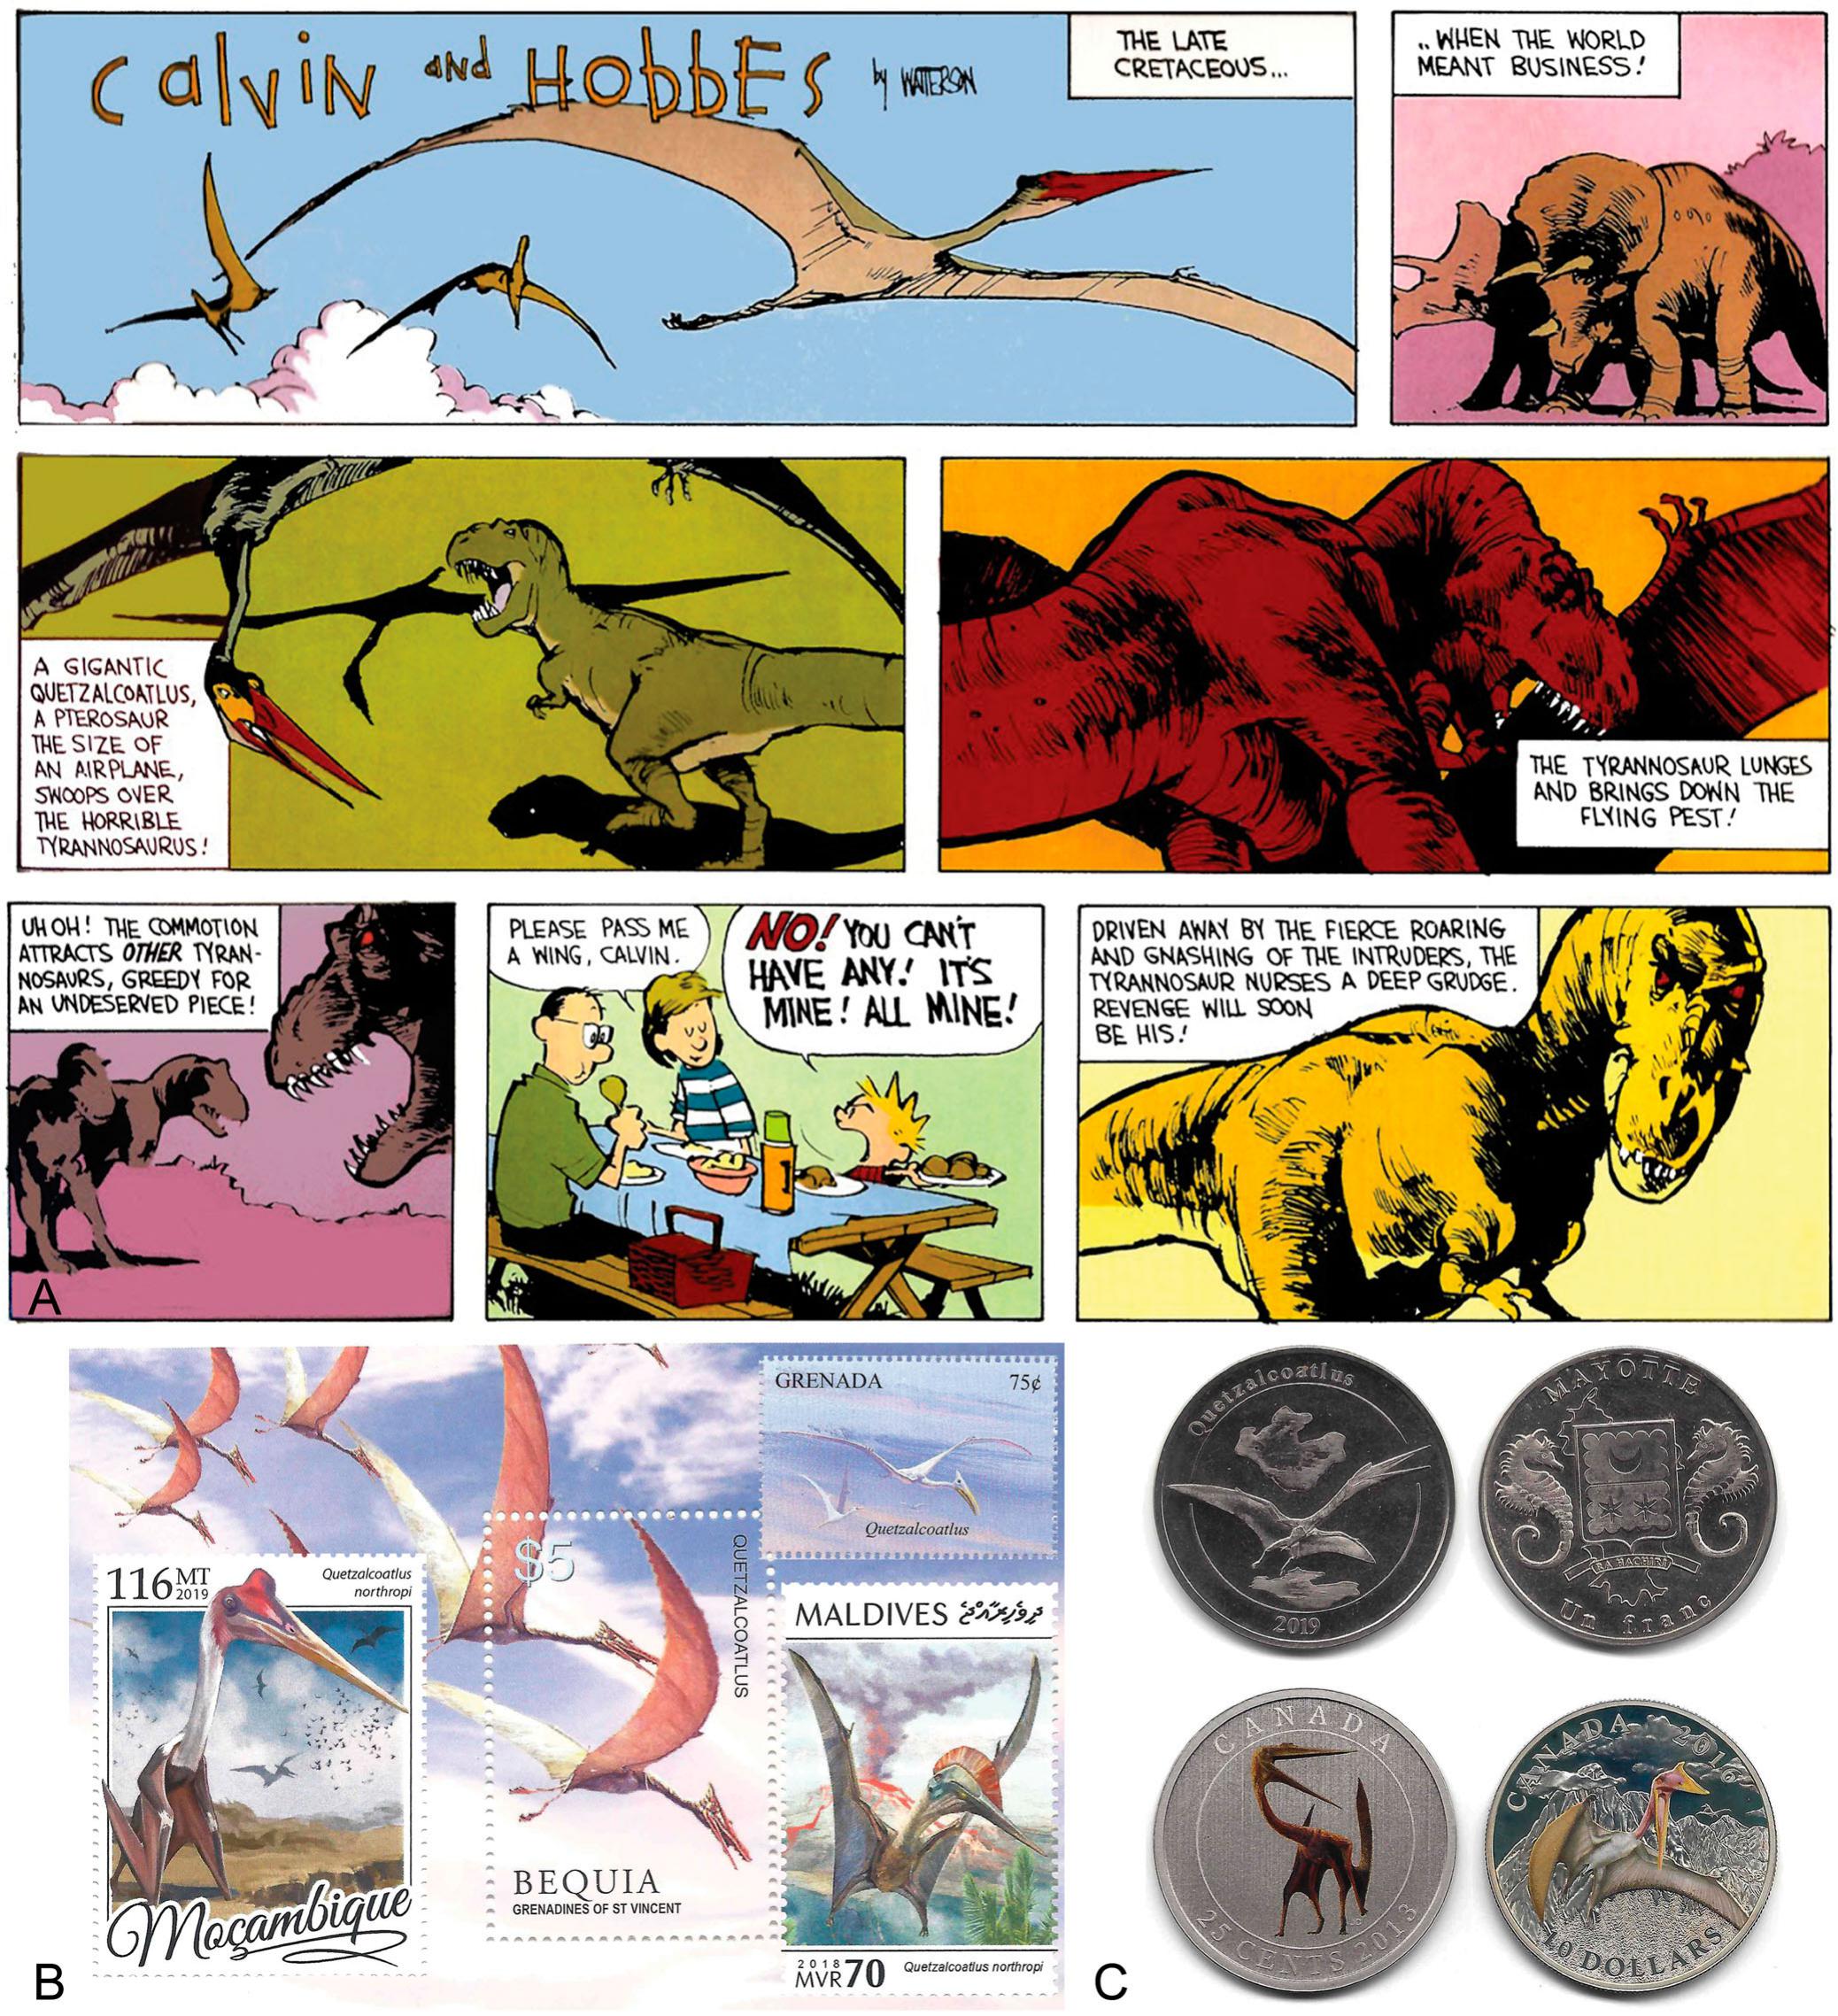 Pteranodon and beyond: the history of giant pterosaurs from 1870 onwards